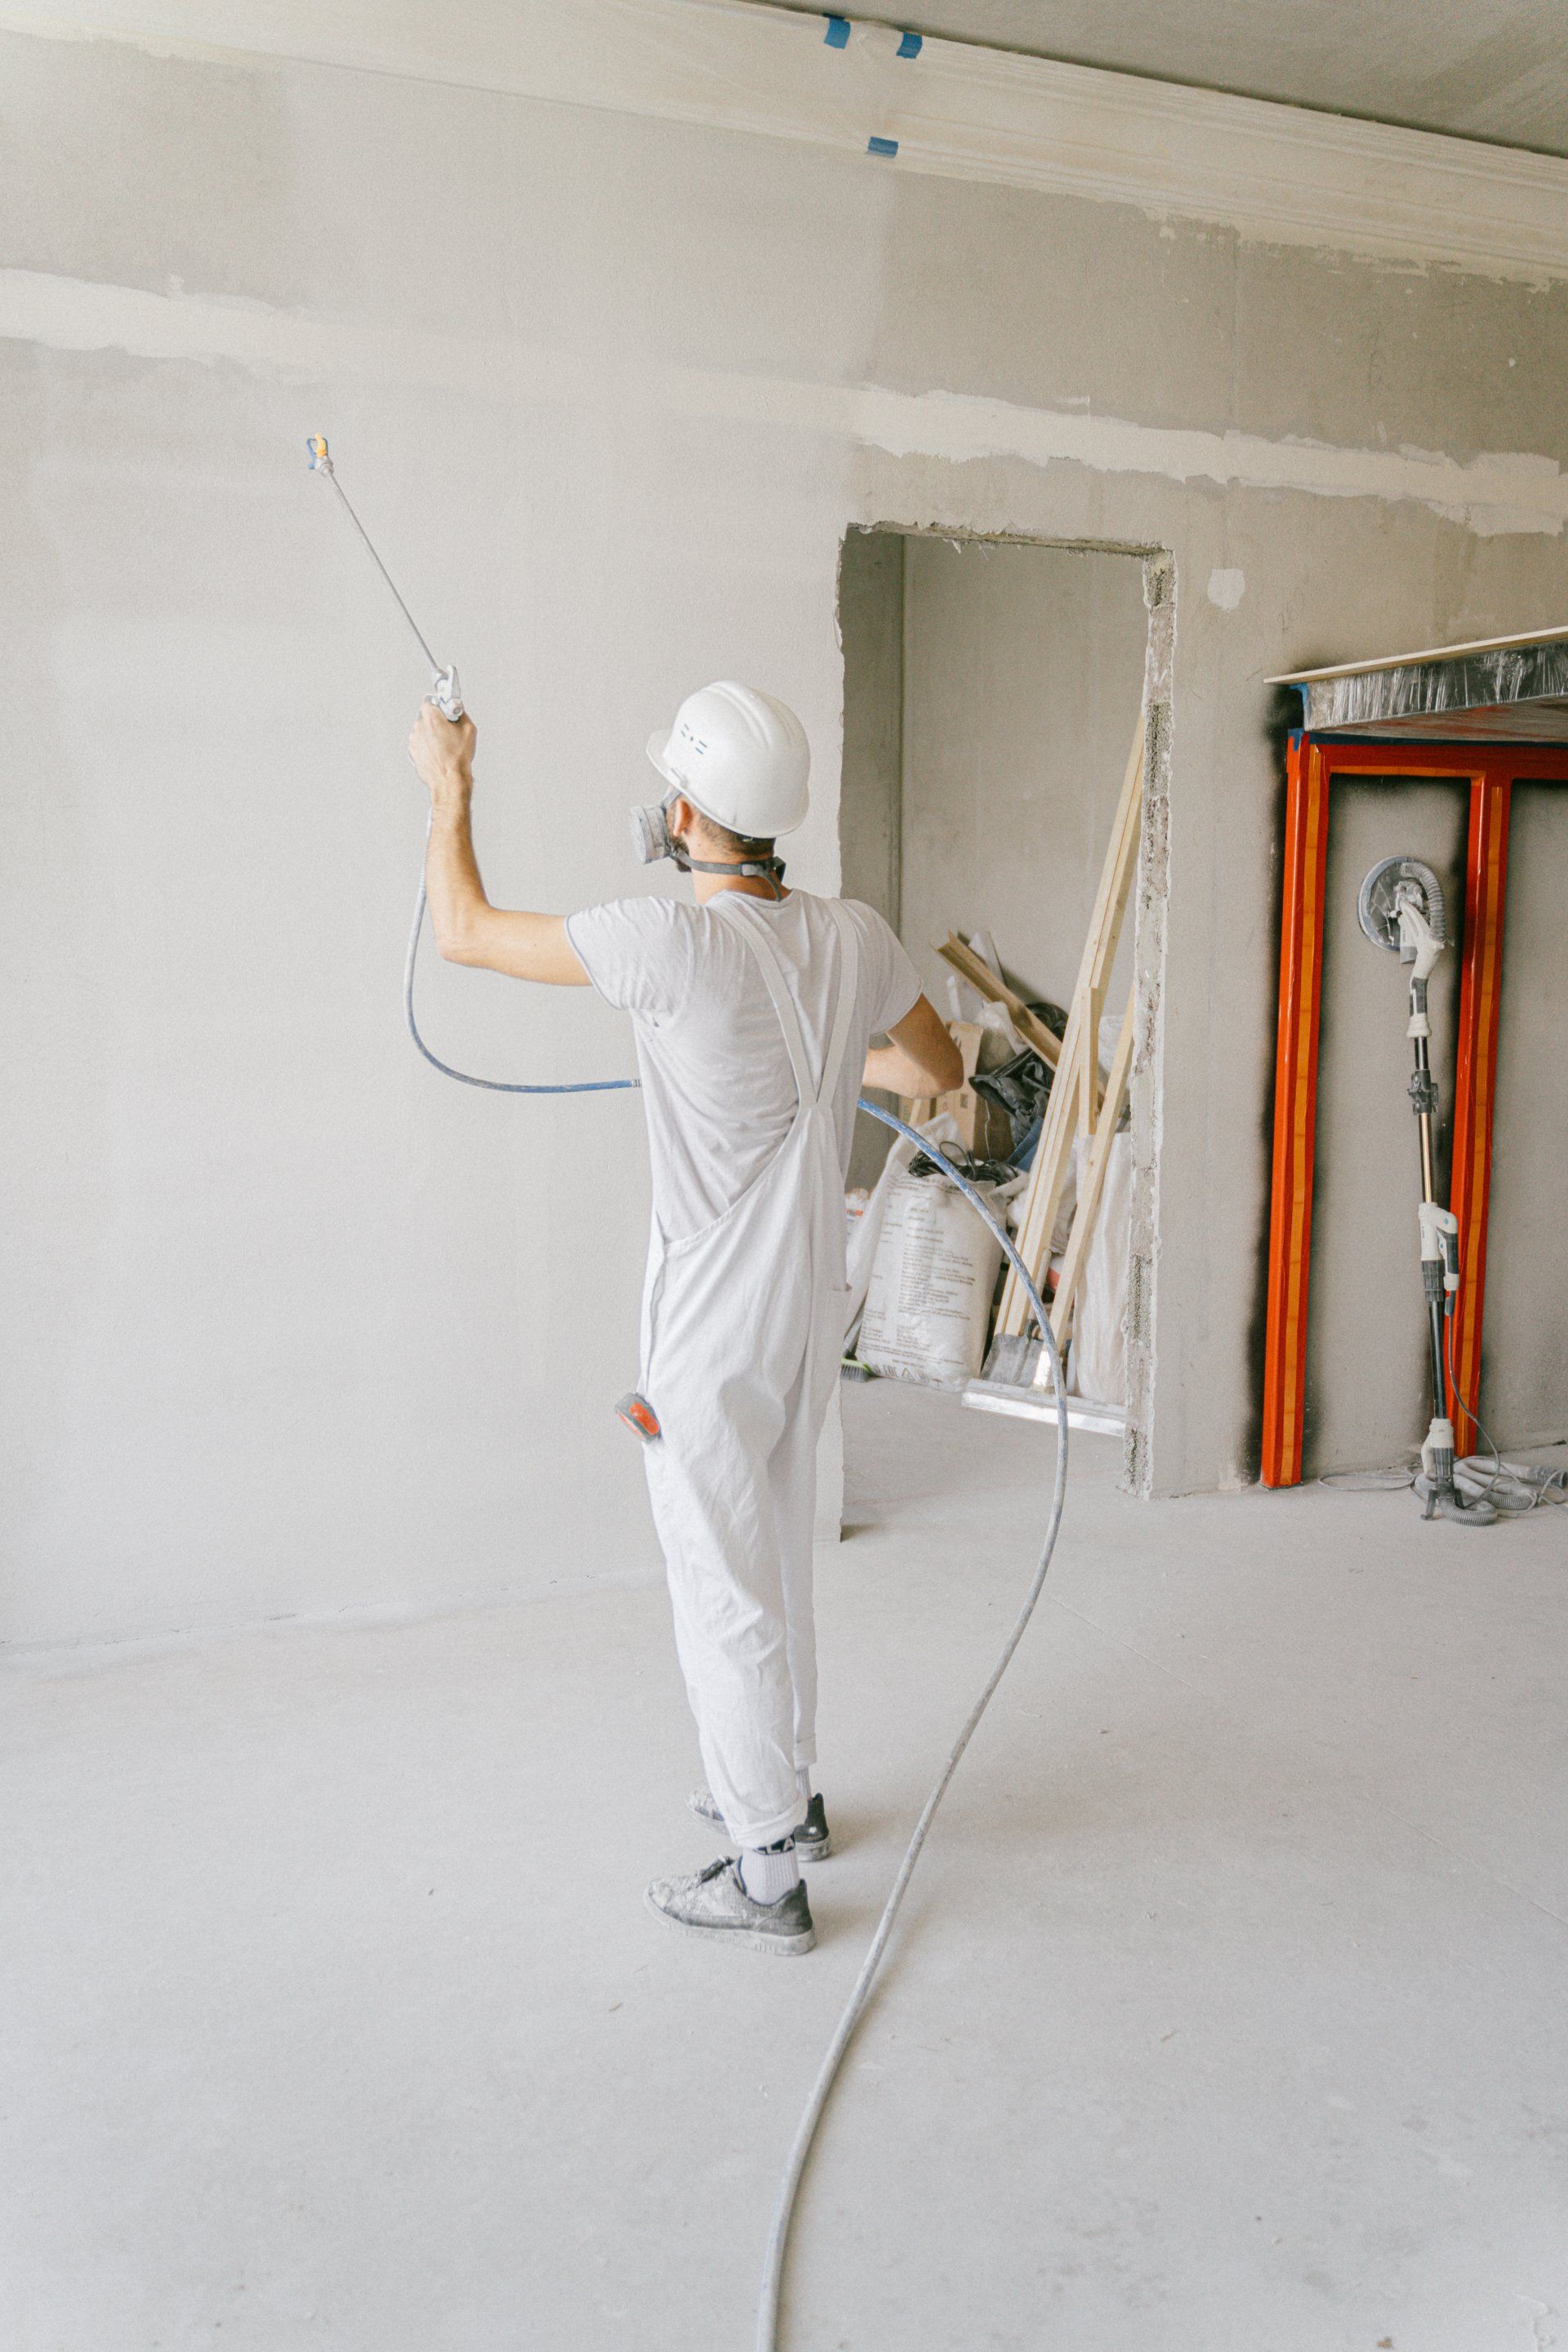 Drywall finishing includes taping, mudding, sanding and texturing